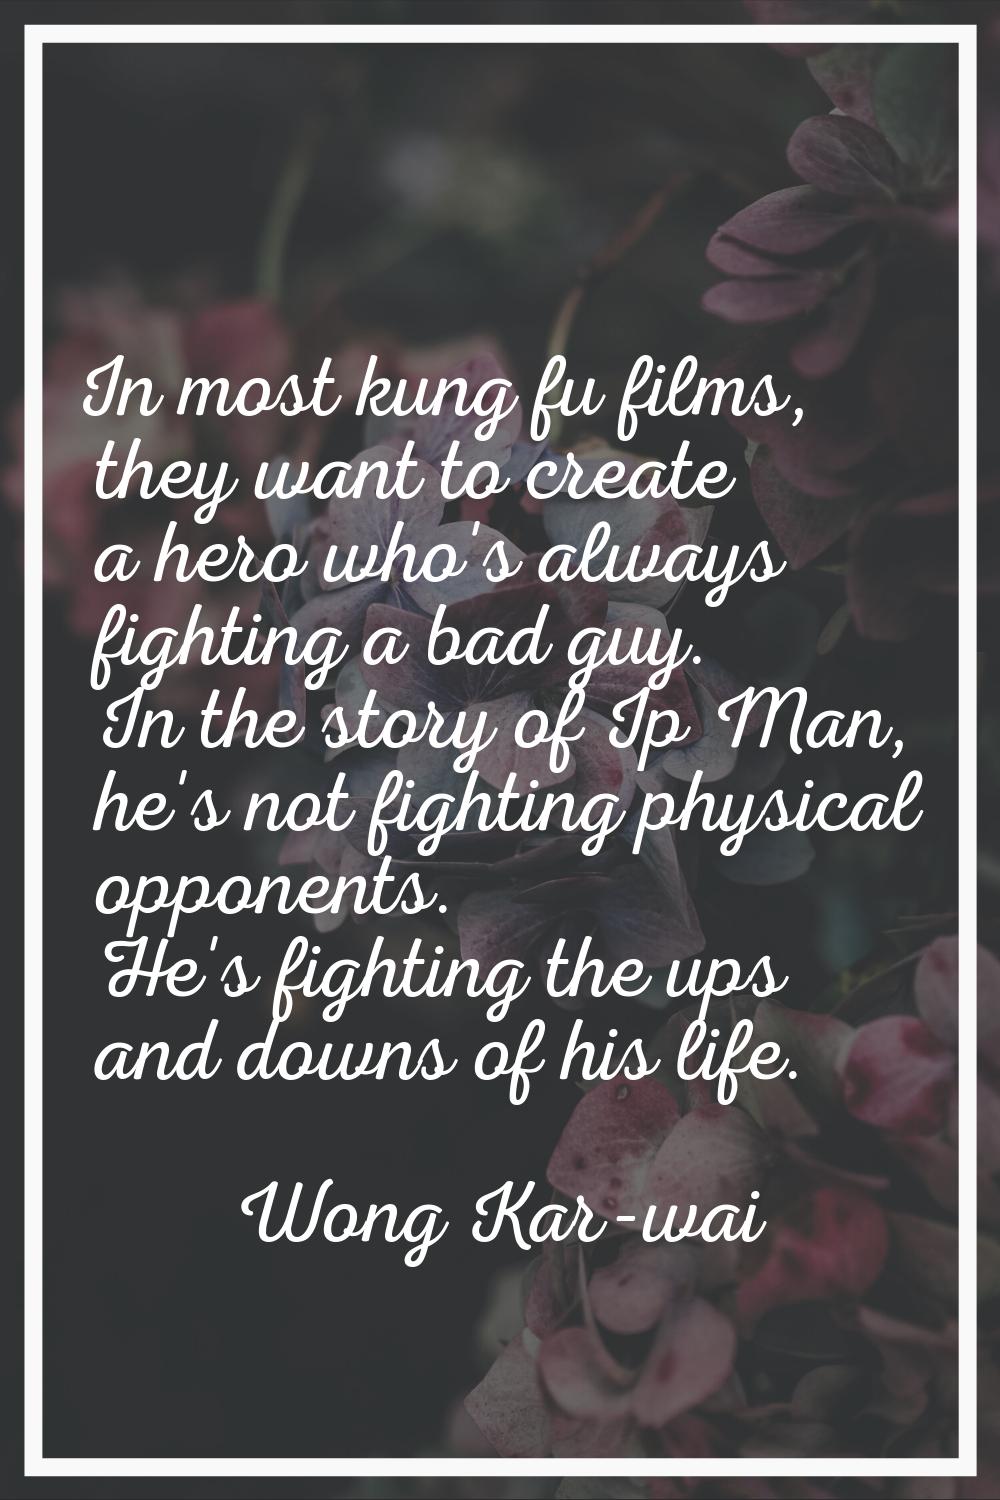 In most kung fu films, they want to create a hero who's always fighting a bad guy. In the story of 